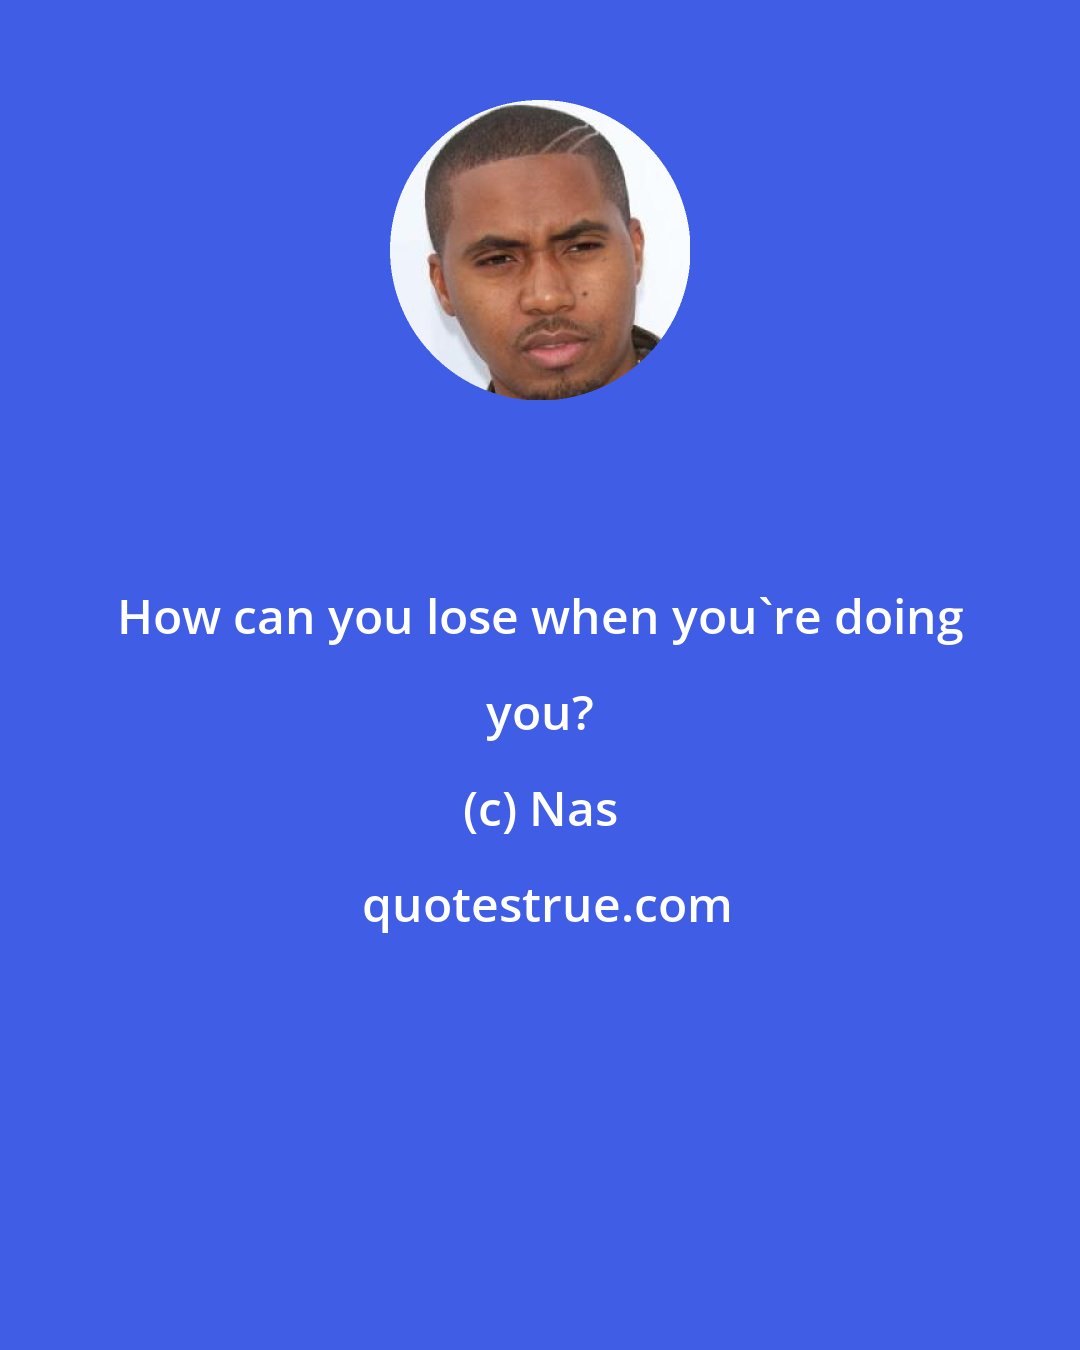 Nas: How can you lose when you're doing you?